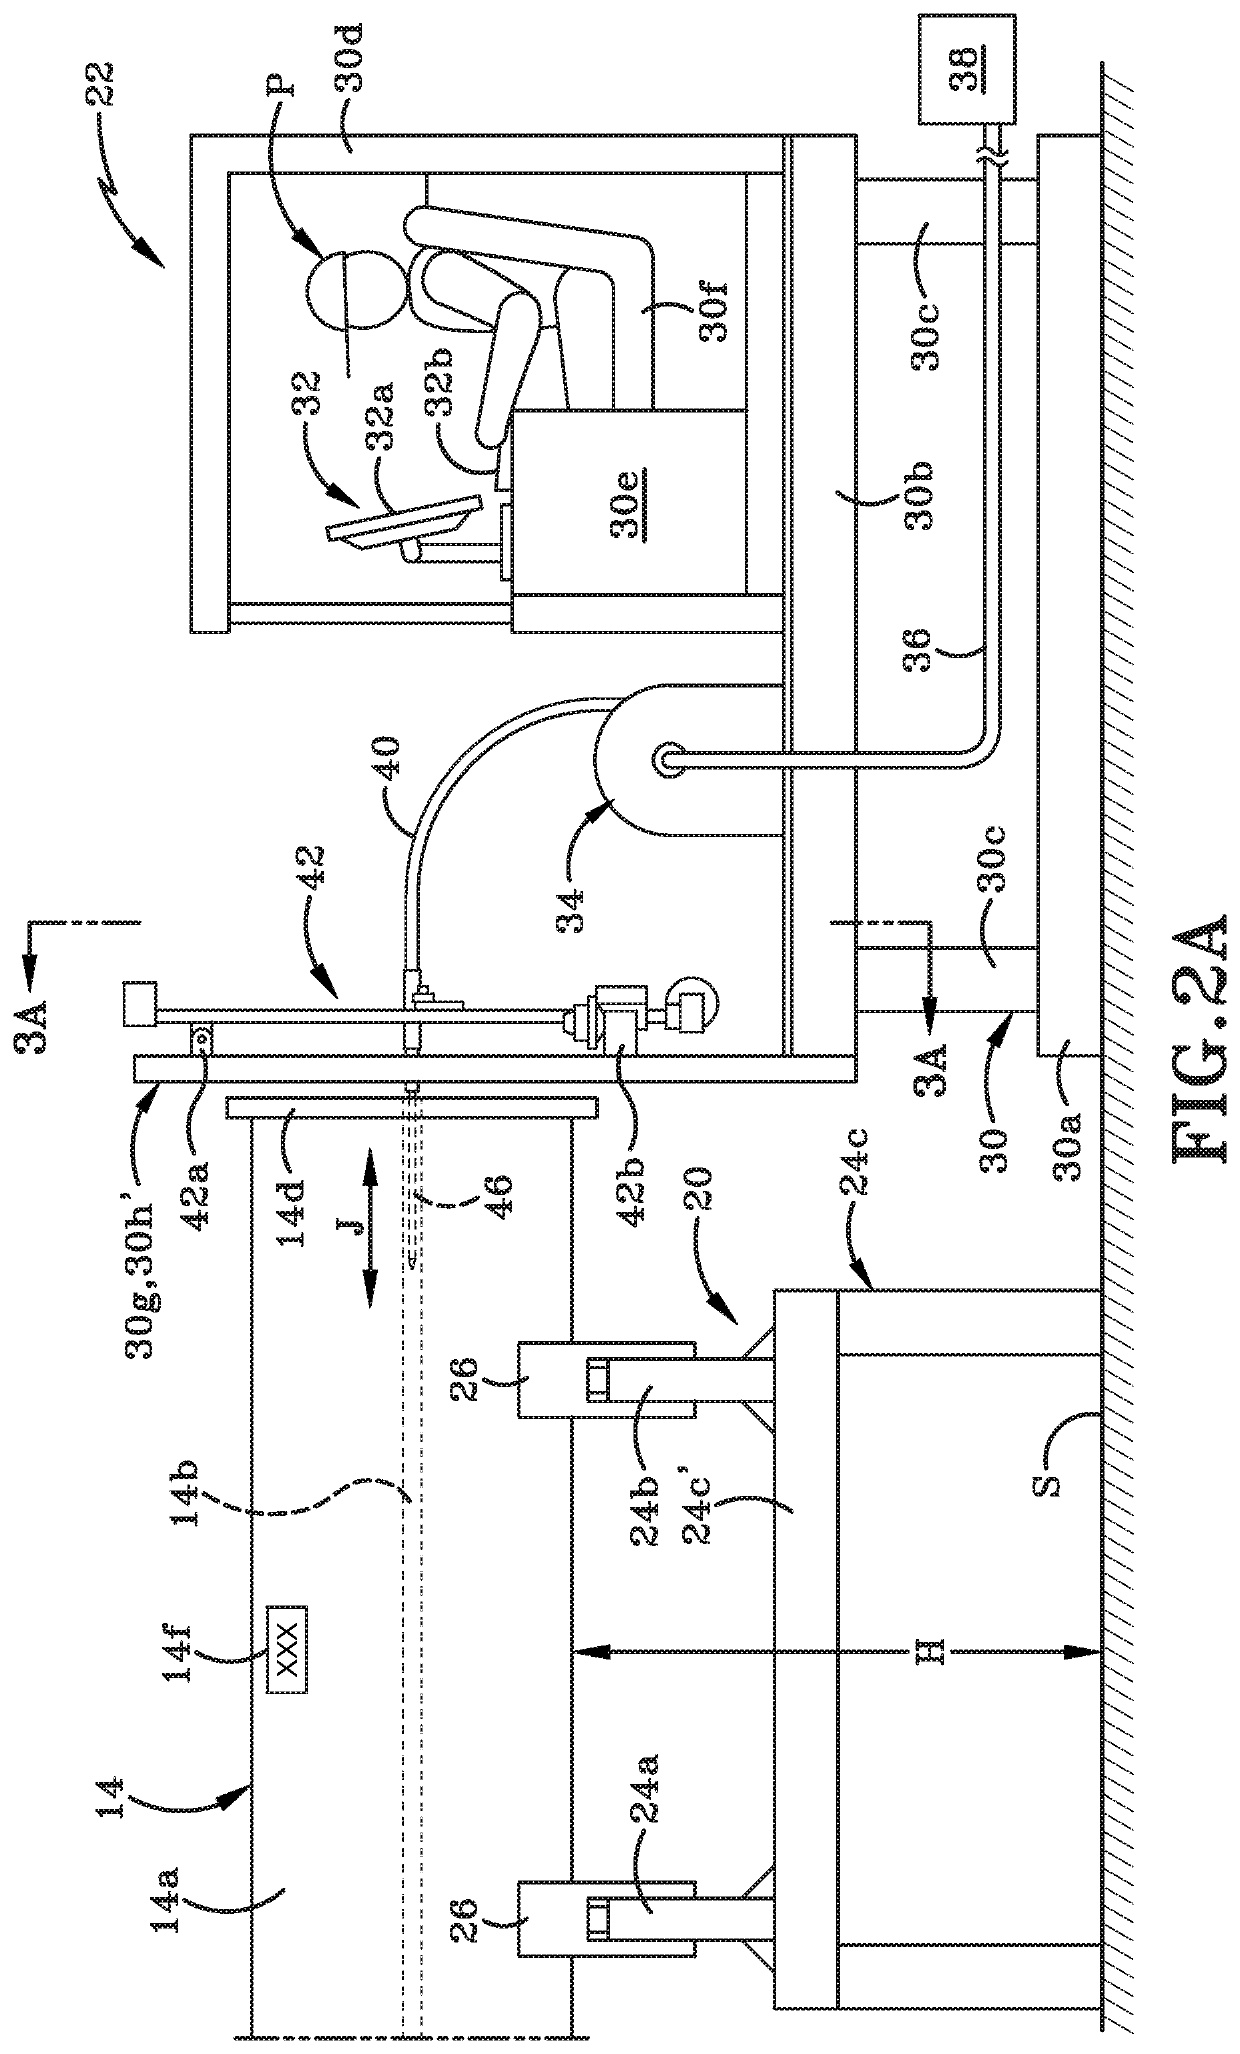 Method of cleaning heat exchangers or tube bundles using a cleaning station